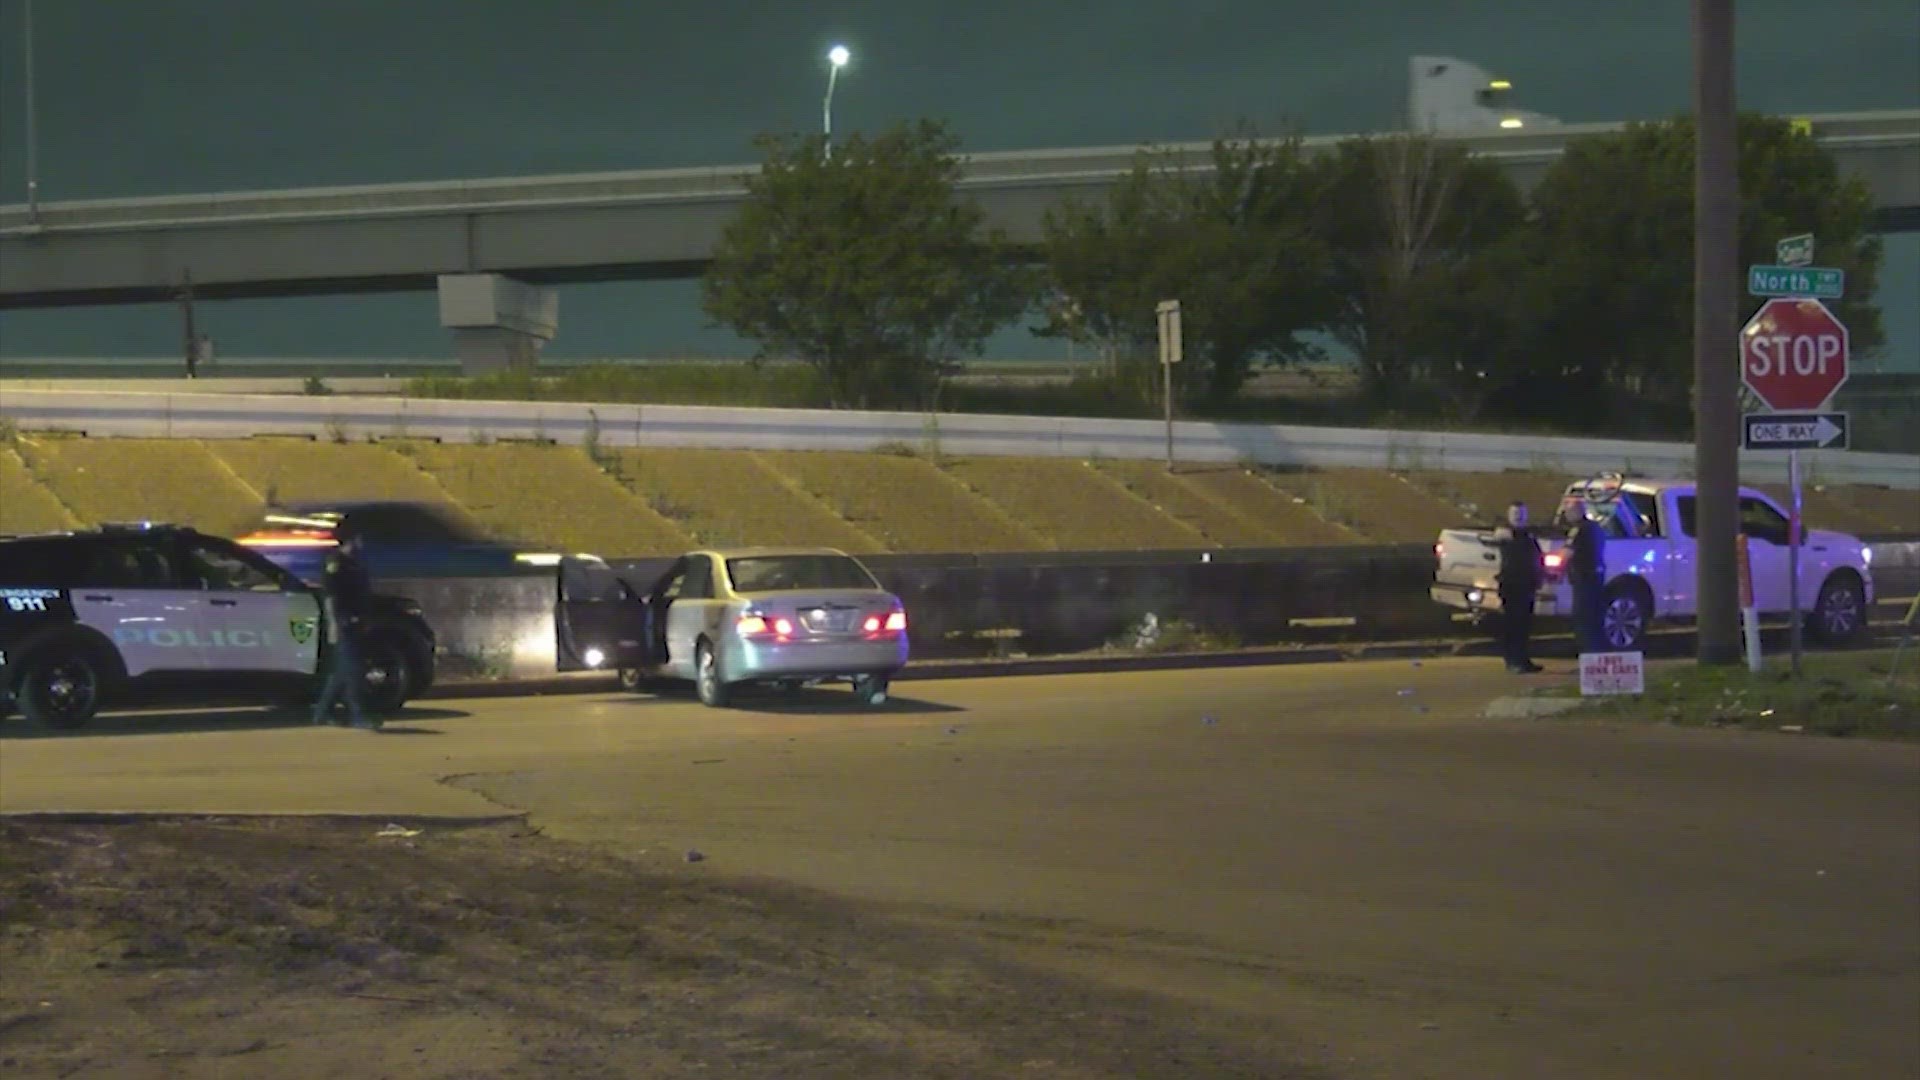 A gunman is on the run after a man was shot and killed in his car at a stop sign near the North Freeway, according to the Houston Police Department.